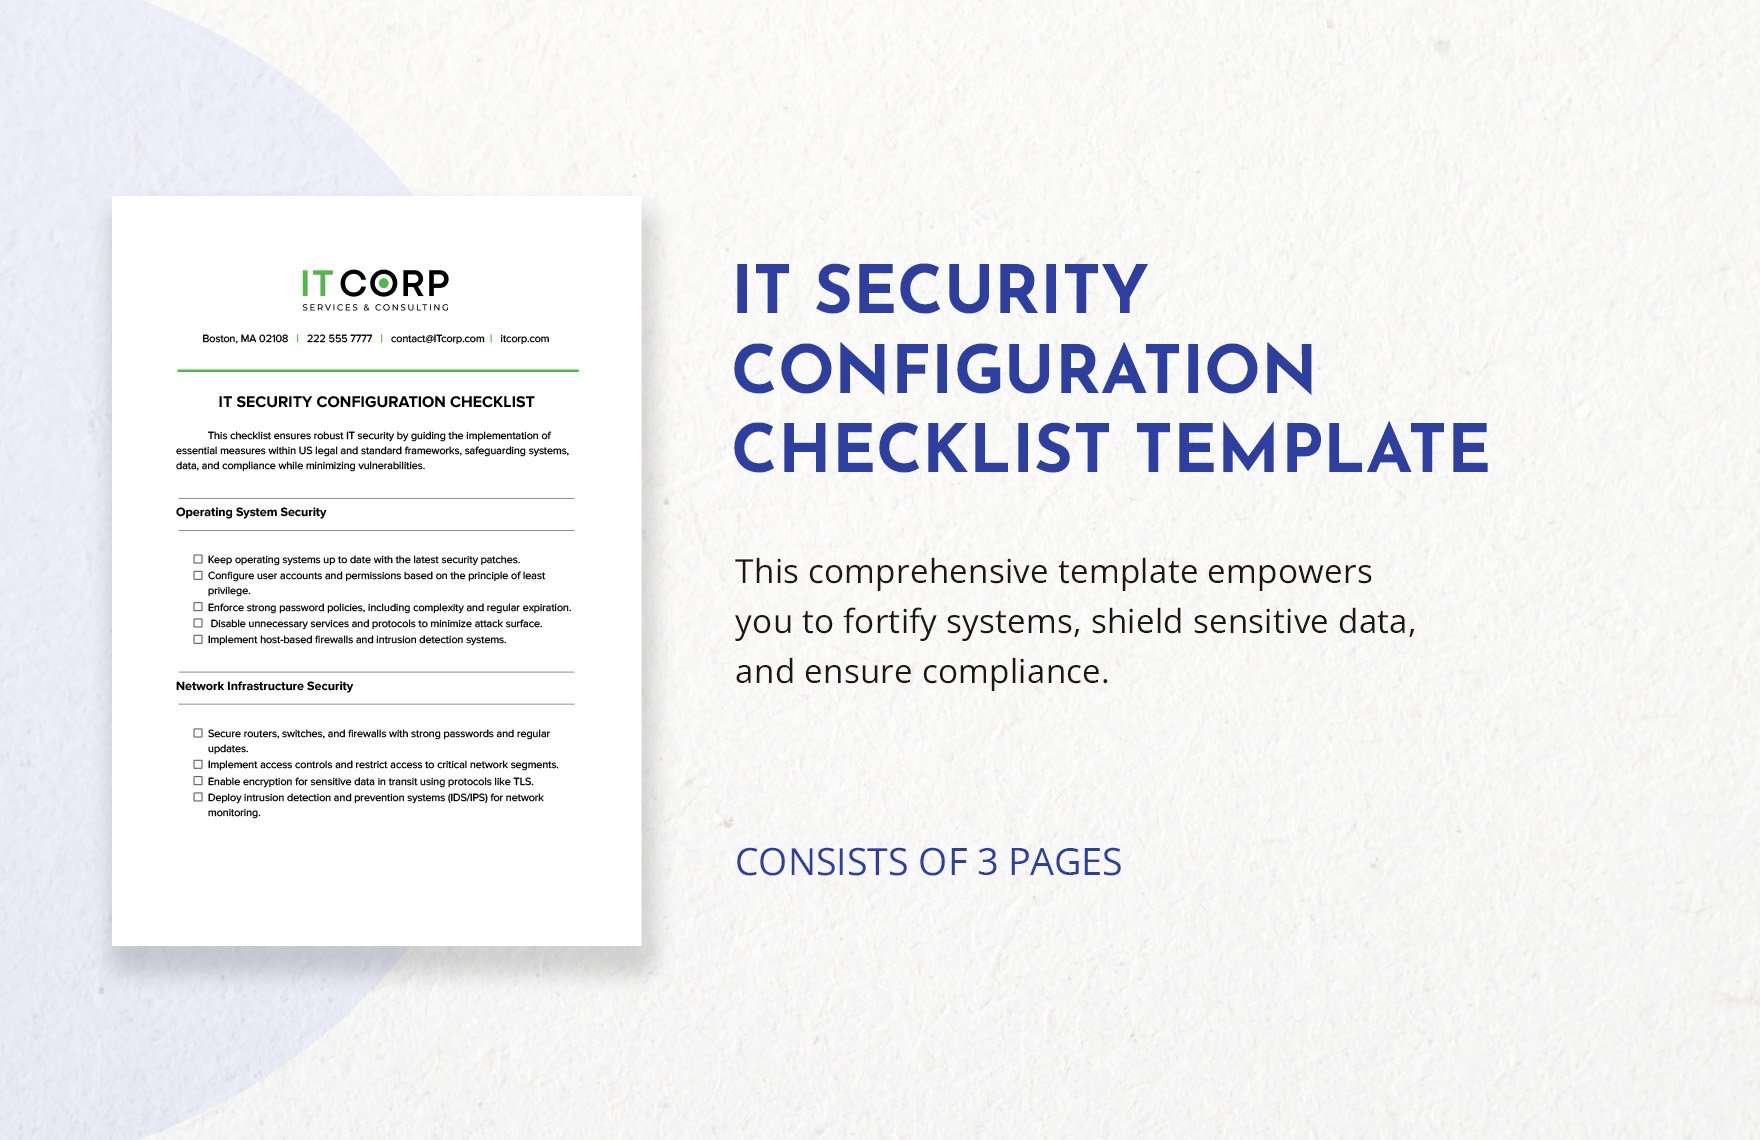 IT Security Configuration Checklist Template